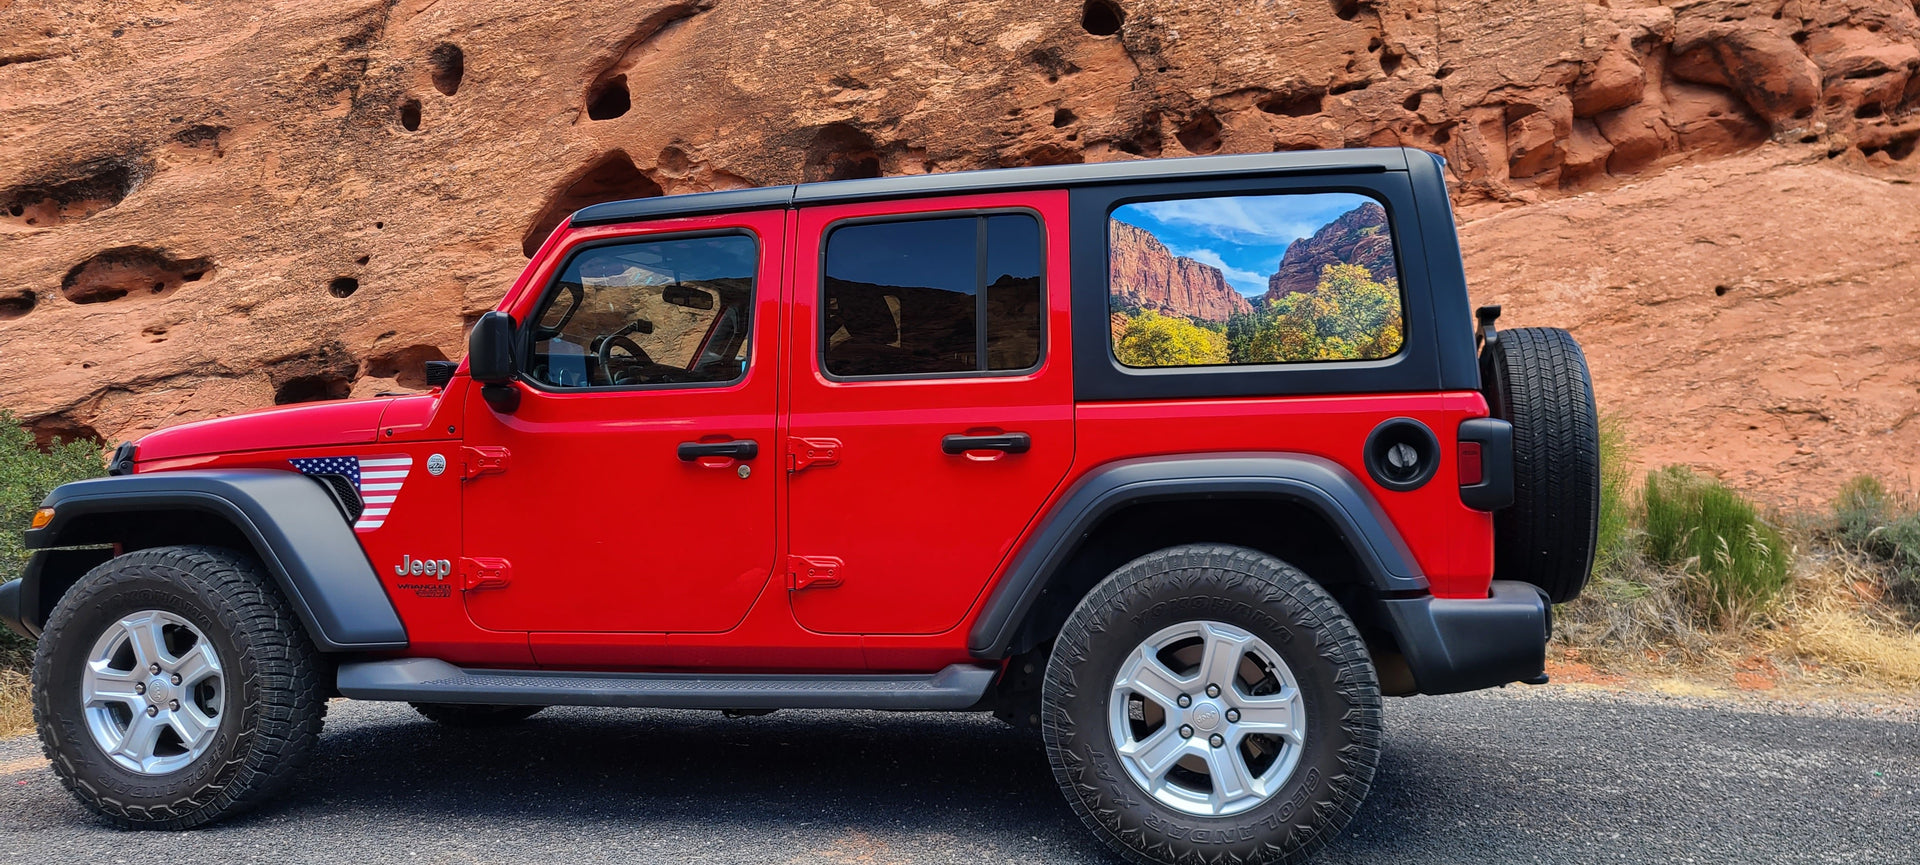 Incredible National Park images to make your Jeep the talk of the town. 